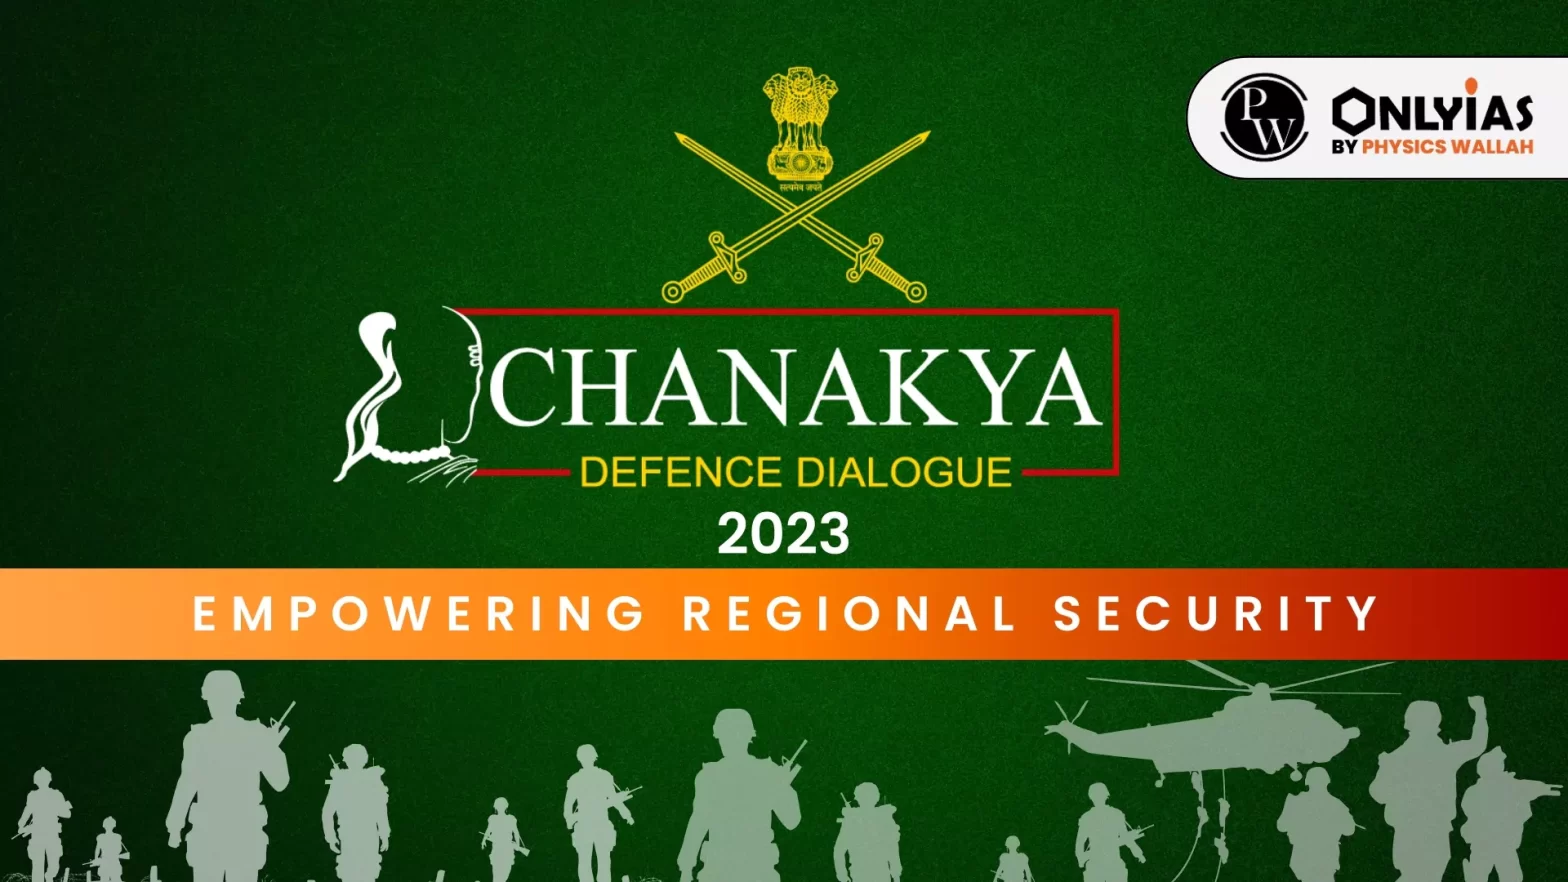 Chanakya Defence Dialogue 2023: Empowering Regional Security